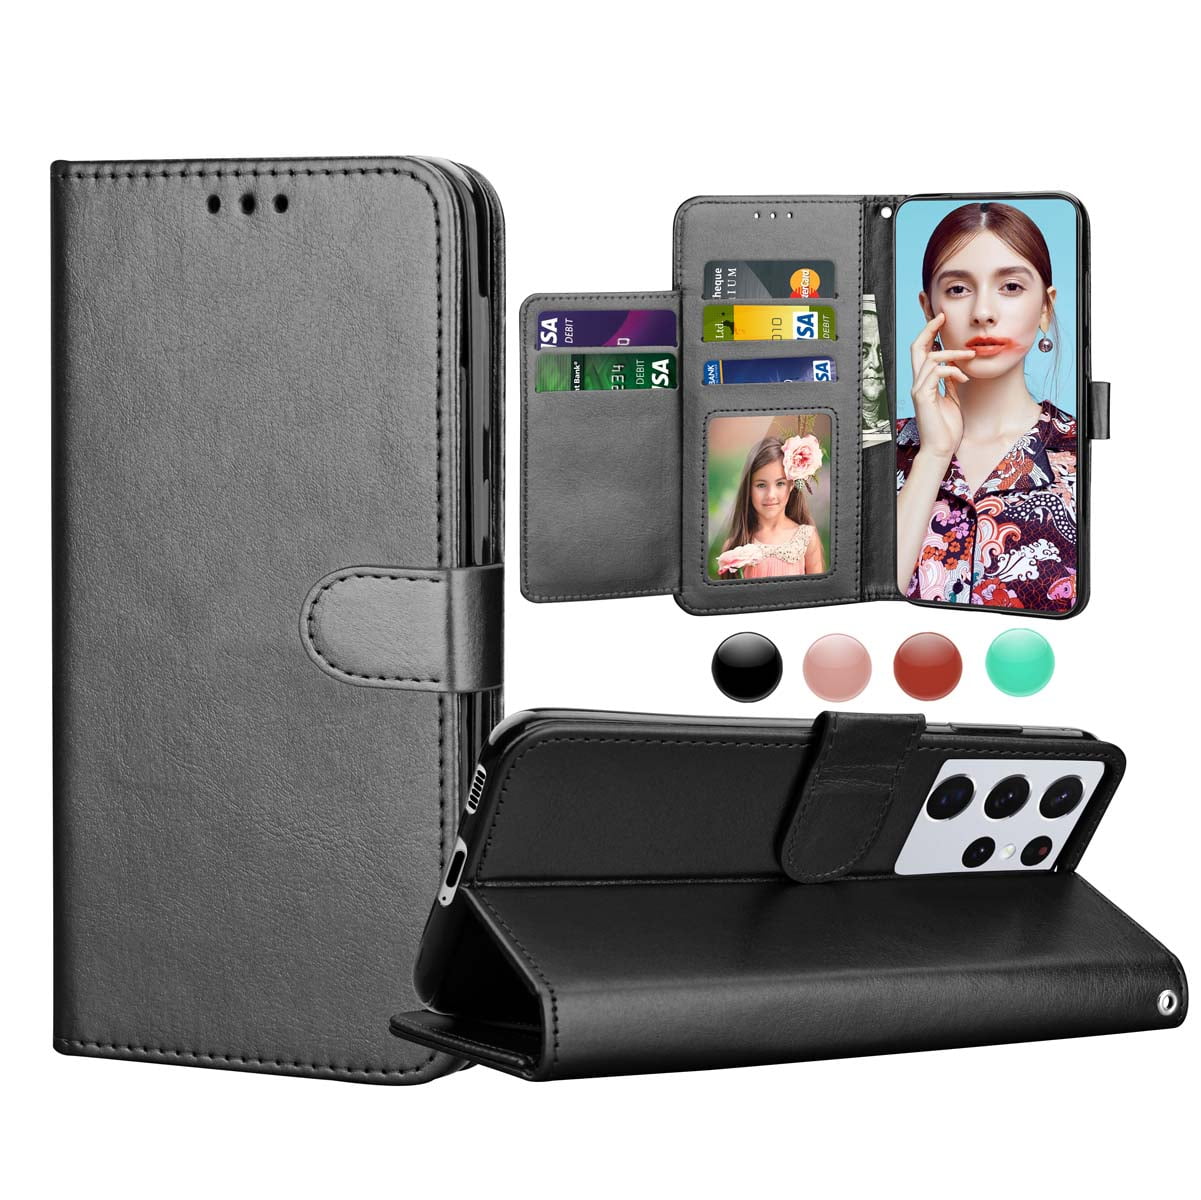 Galaxy S21 5G Case,Bcov Cute Dragonfly Leather Flip Phone Case Wallet Cover with Card Slot Holder Kickstand for Samsung Galaxy S21 5G